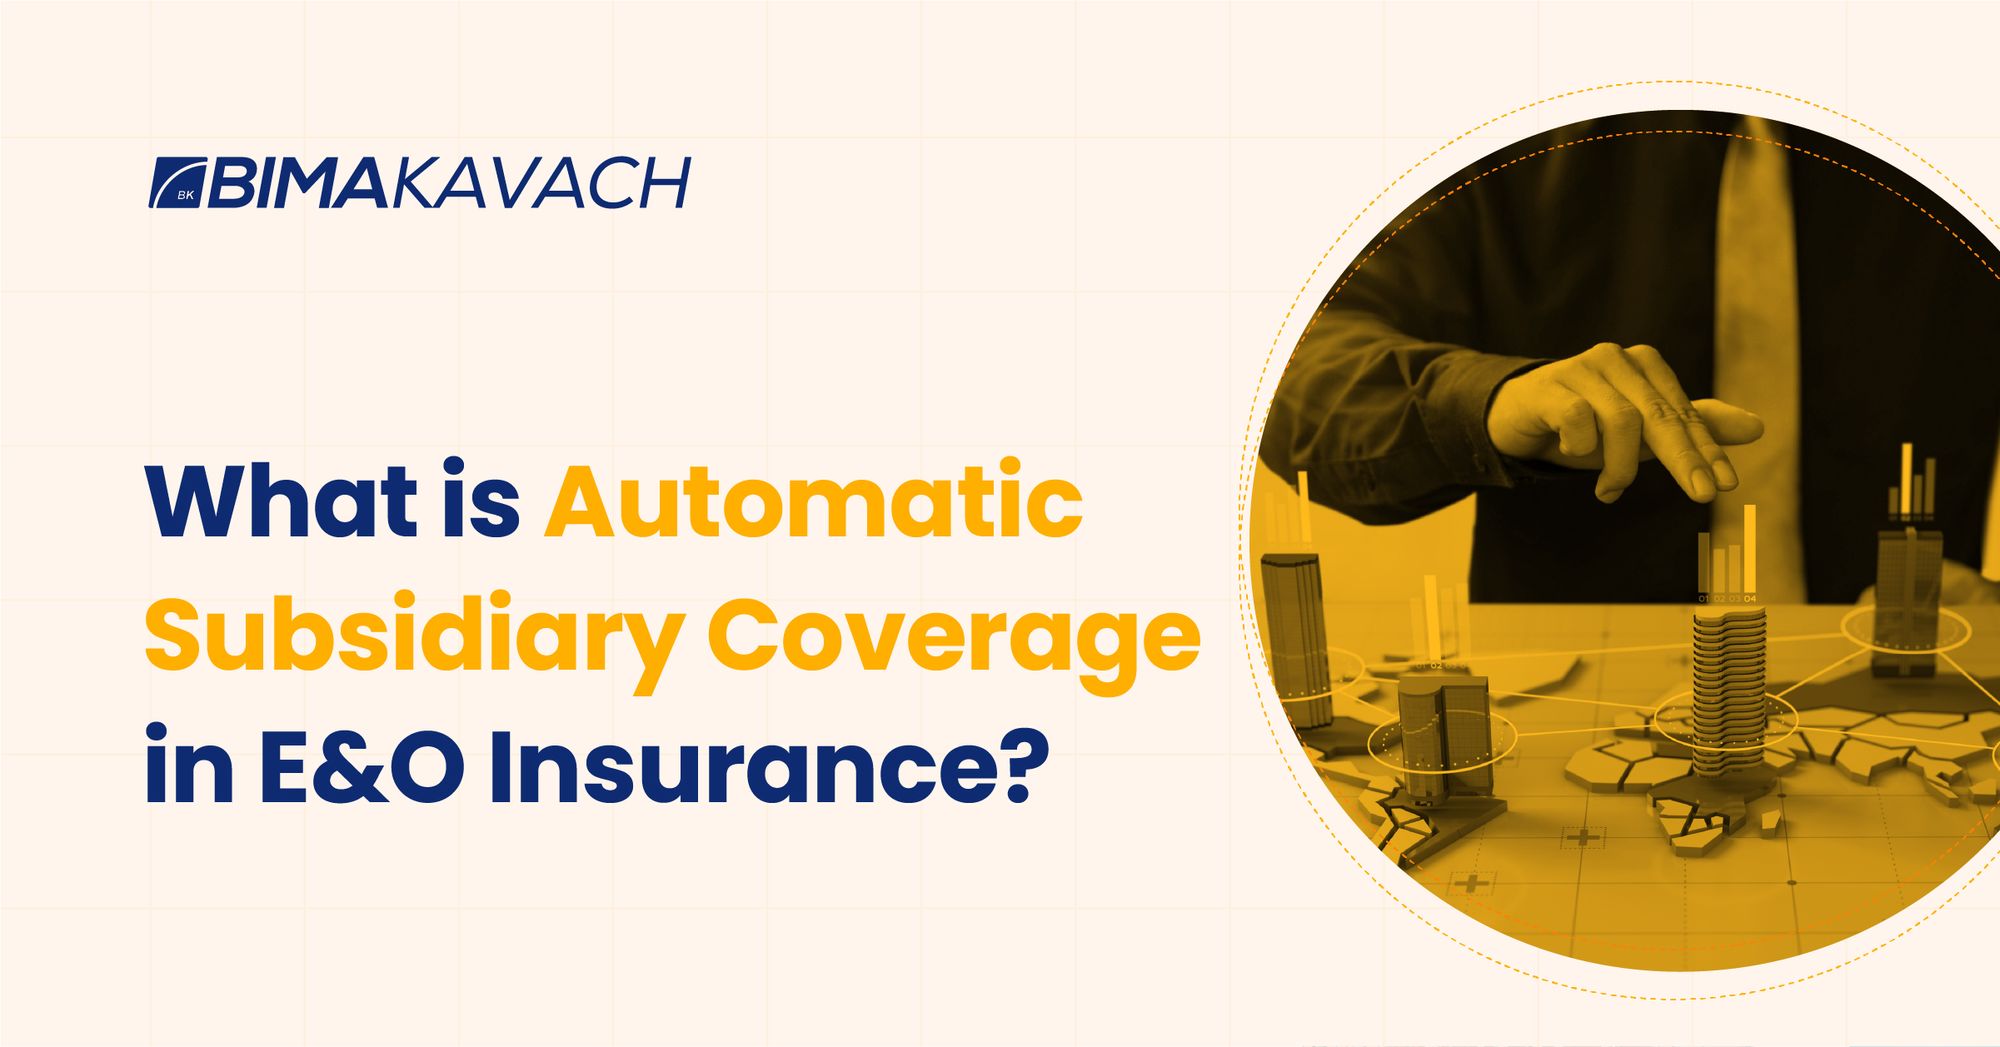 What is Automatic Subsidiary Coverage in E&O Insurance?